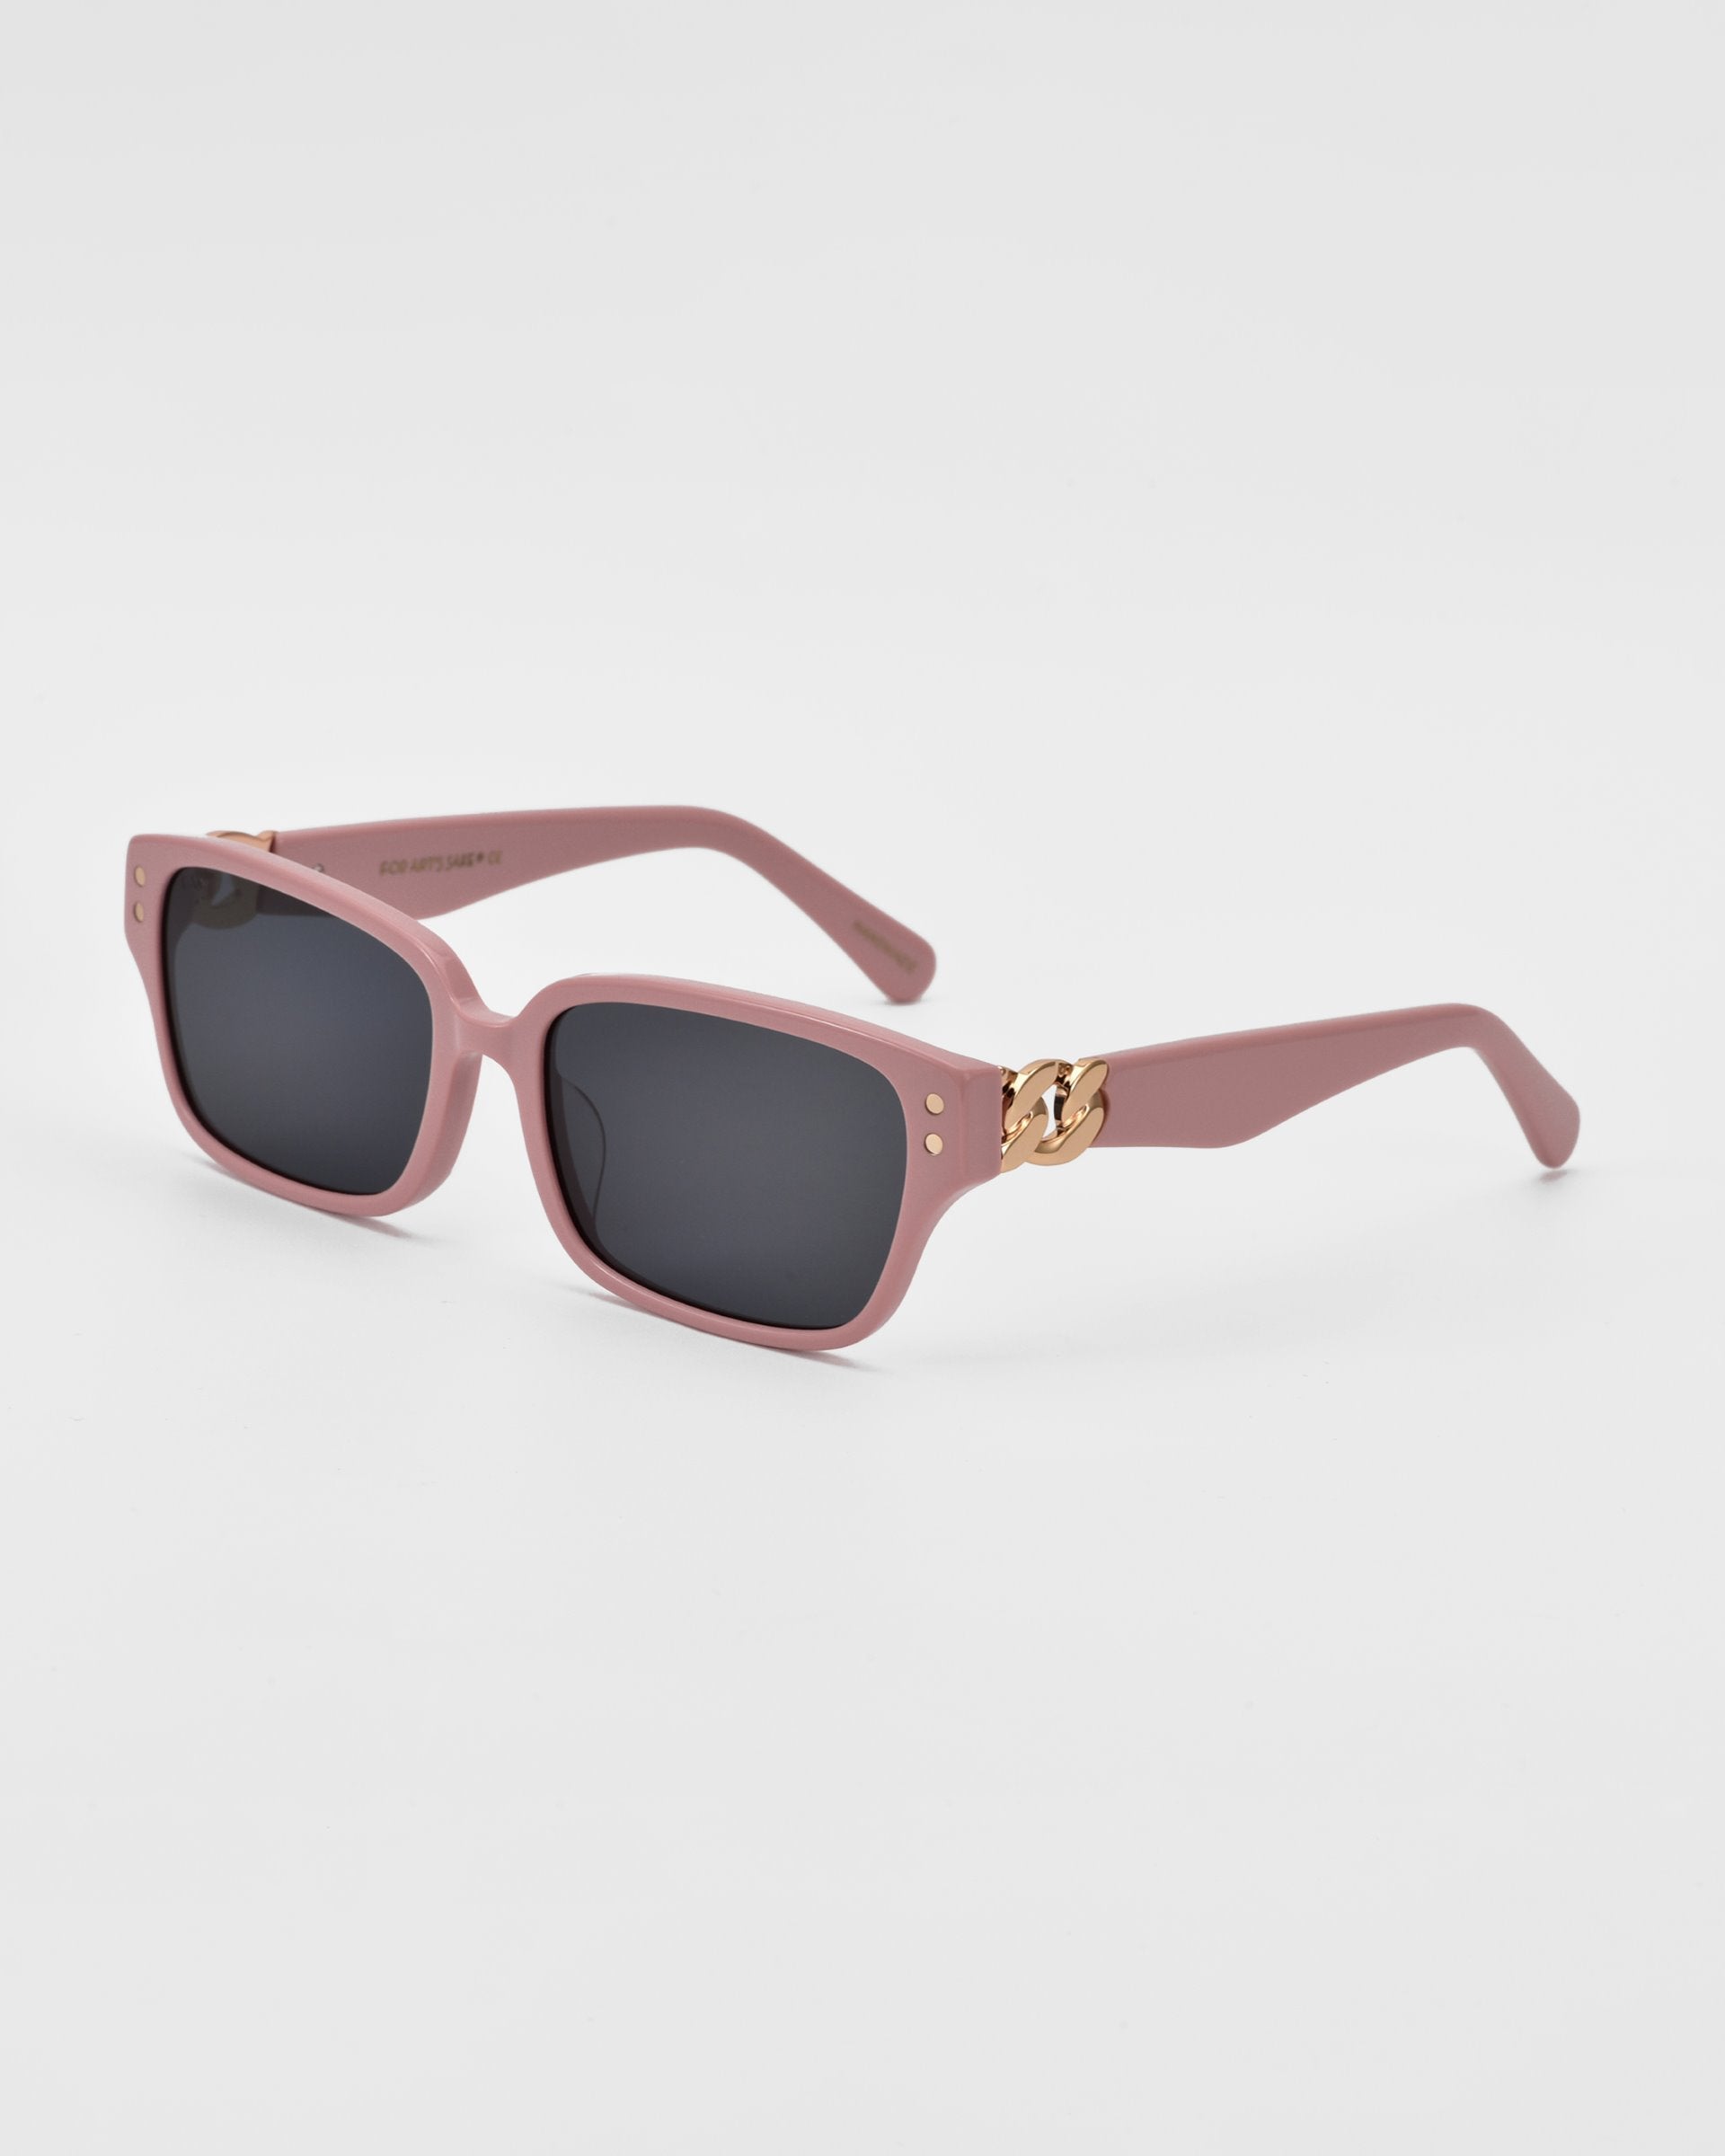 The For Art&#39;s Sake® Zenith sunglasses are a pair of pink rectangular sunglasses with dark lenses. Handcrafted from acetate, the frames feature a small, chunky chain detailing in gold on both sides near the temples, adding a decorative element against the white background.